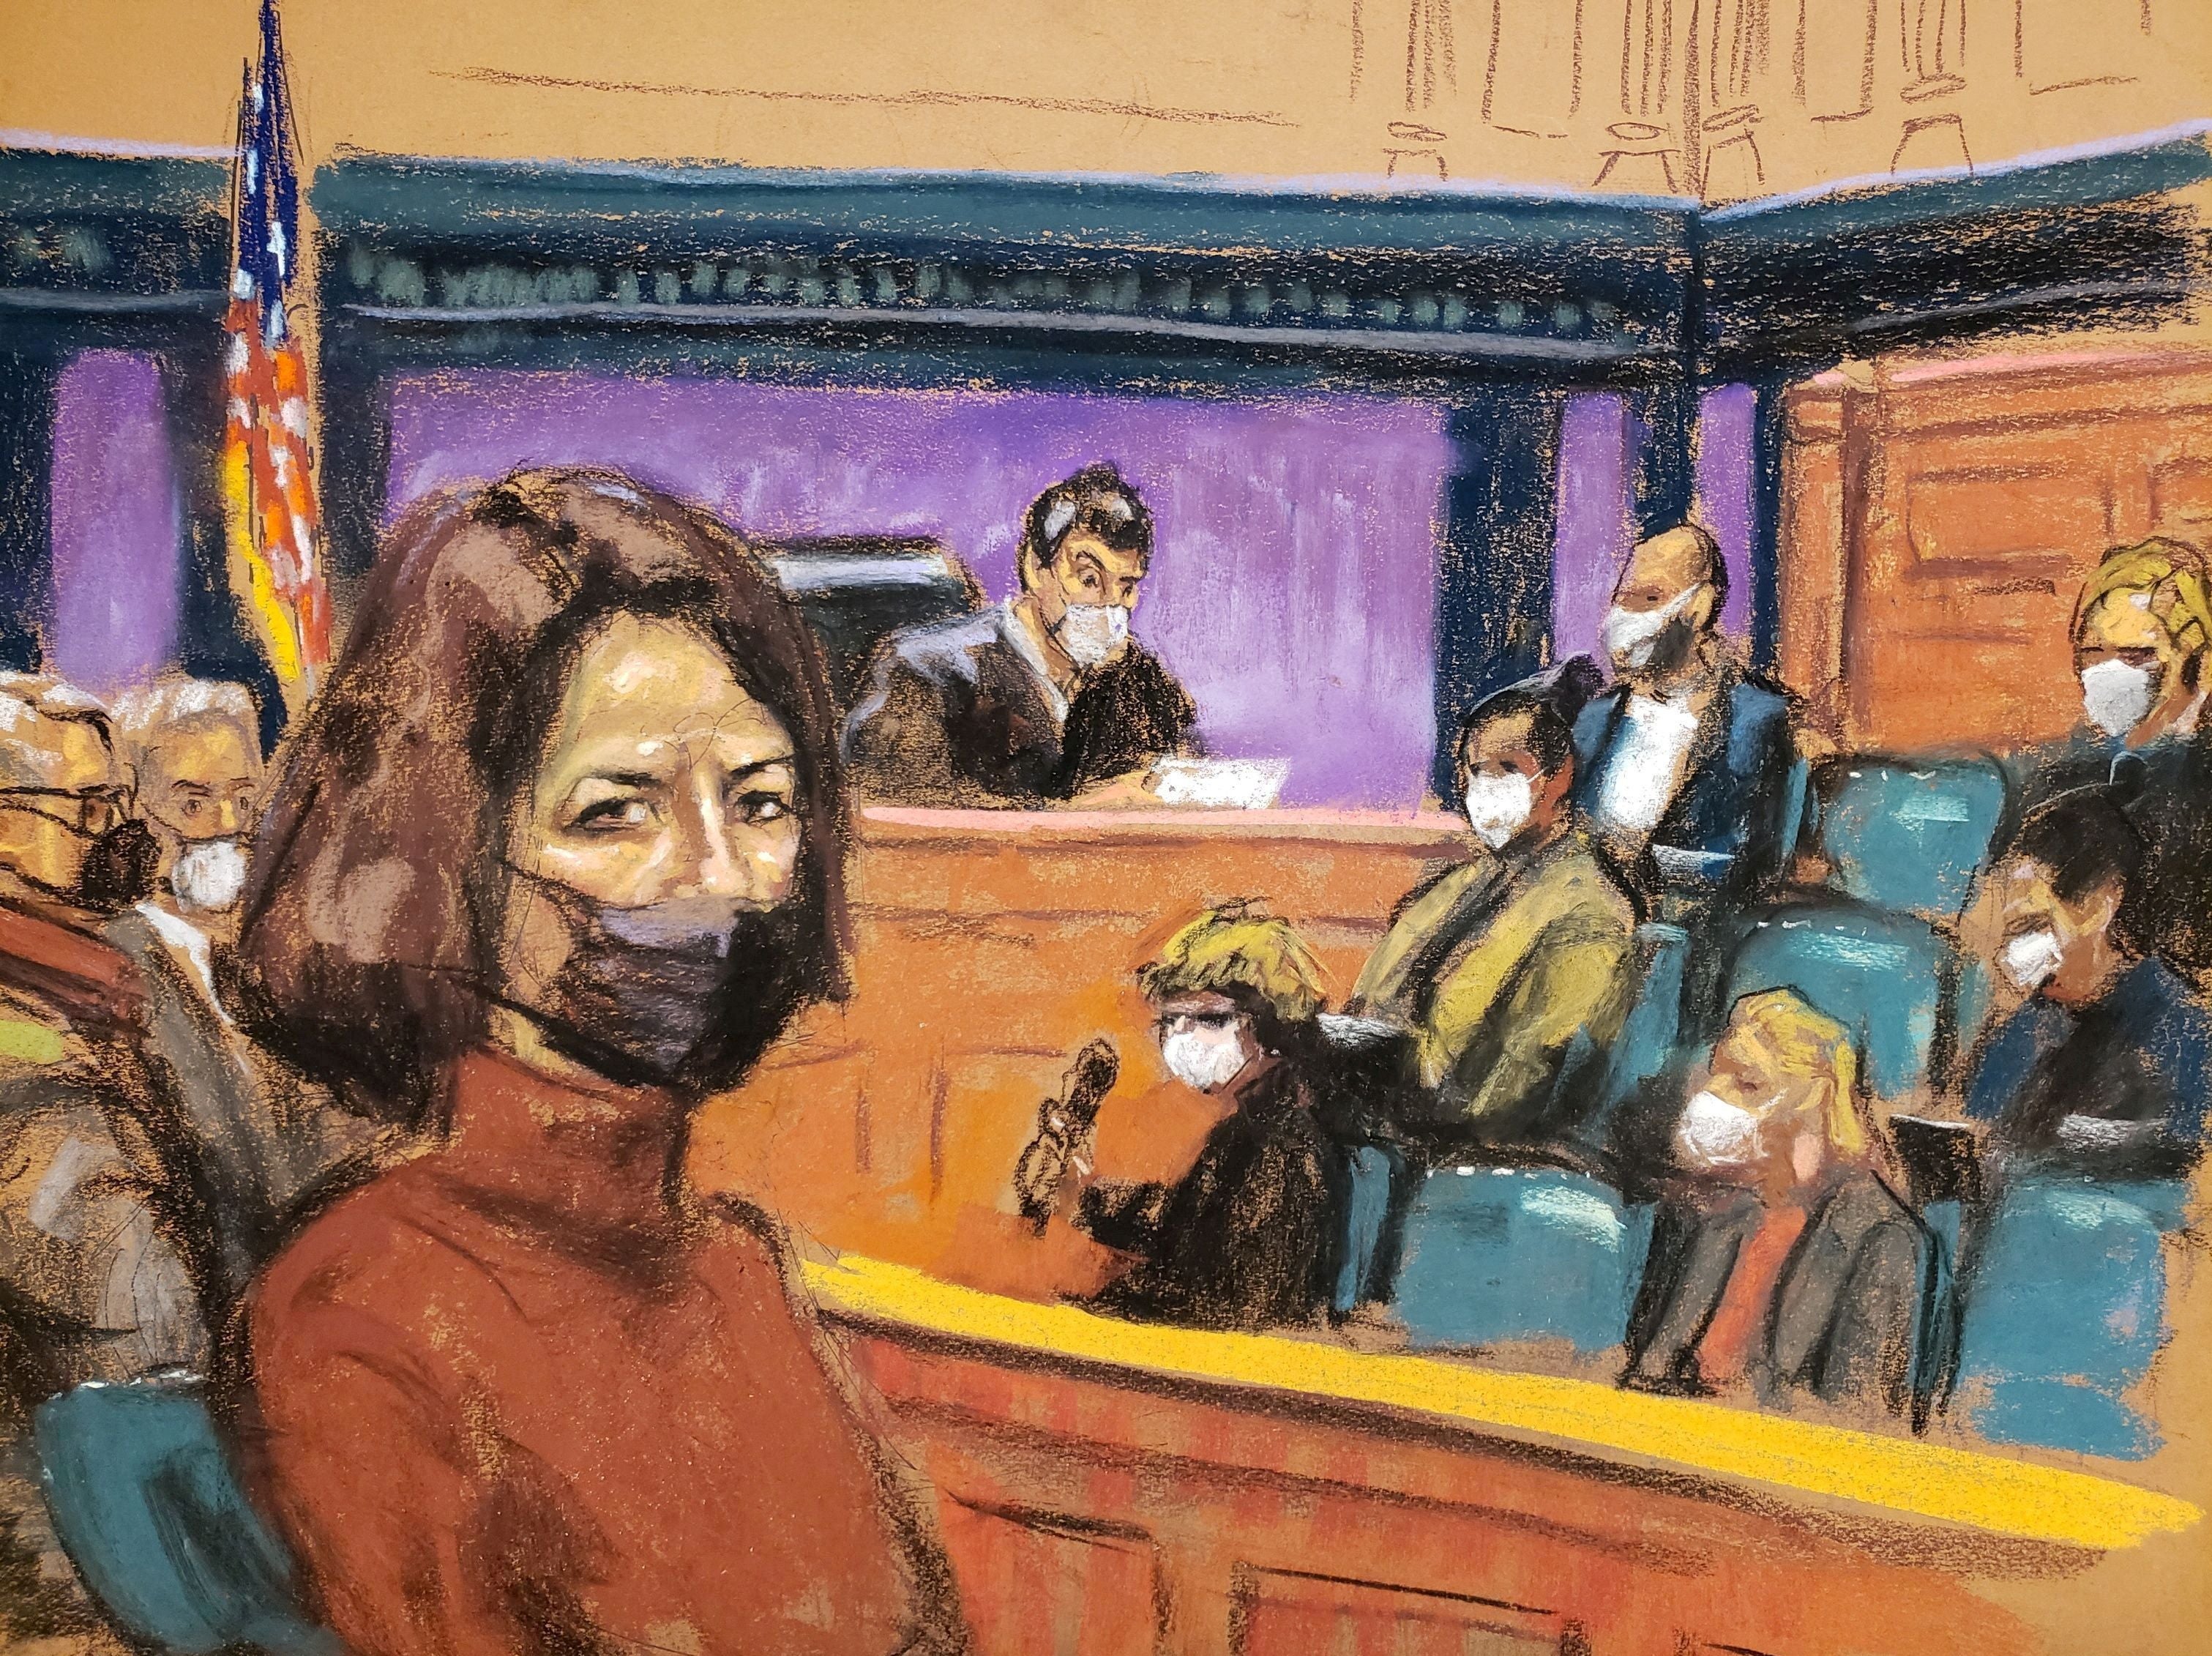 Jeffrey Epstein associate Ghislaine Maxwell sits as the guilty verdict in her sex abuse trial is read in a courtroom sketch in New York City, US, 29 December 2021